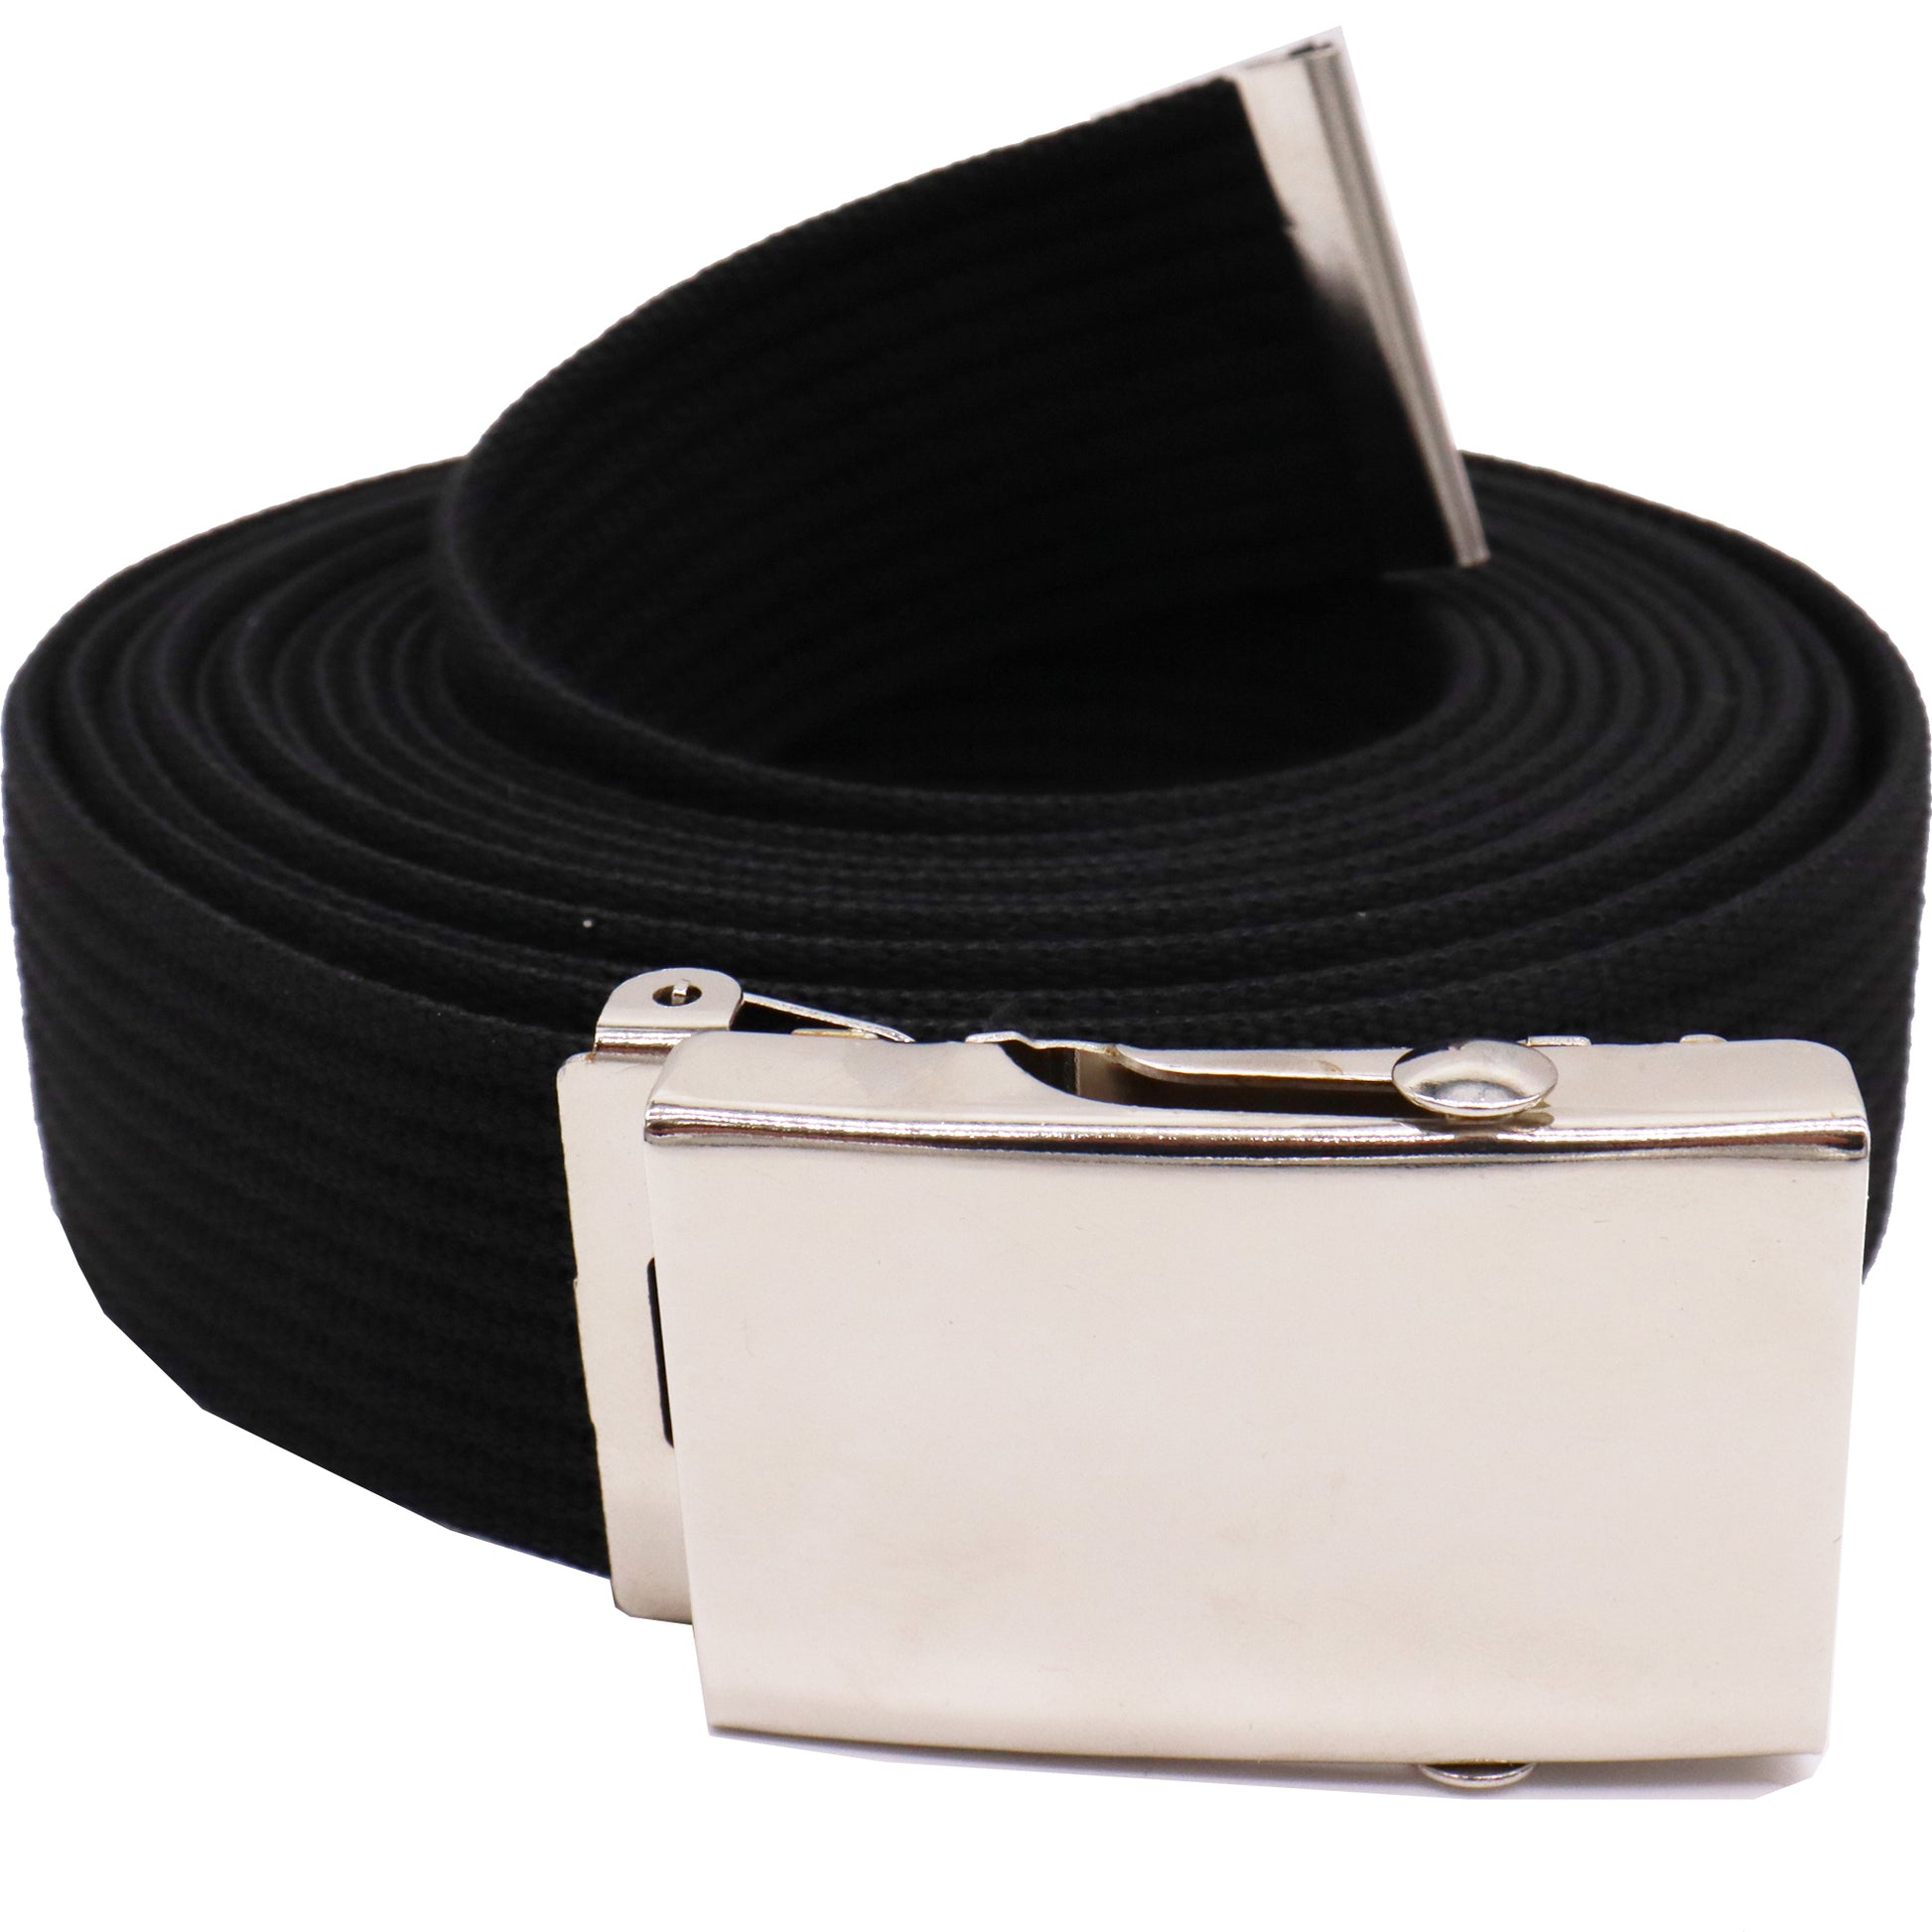 Safekeepers elastic belt - Stretch Belt - Braided Black and Tactical b -  Safekeepers